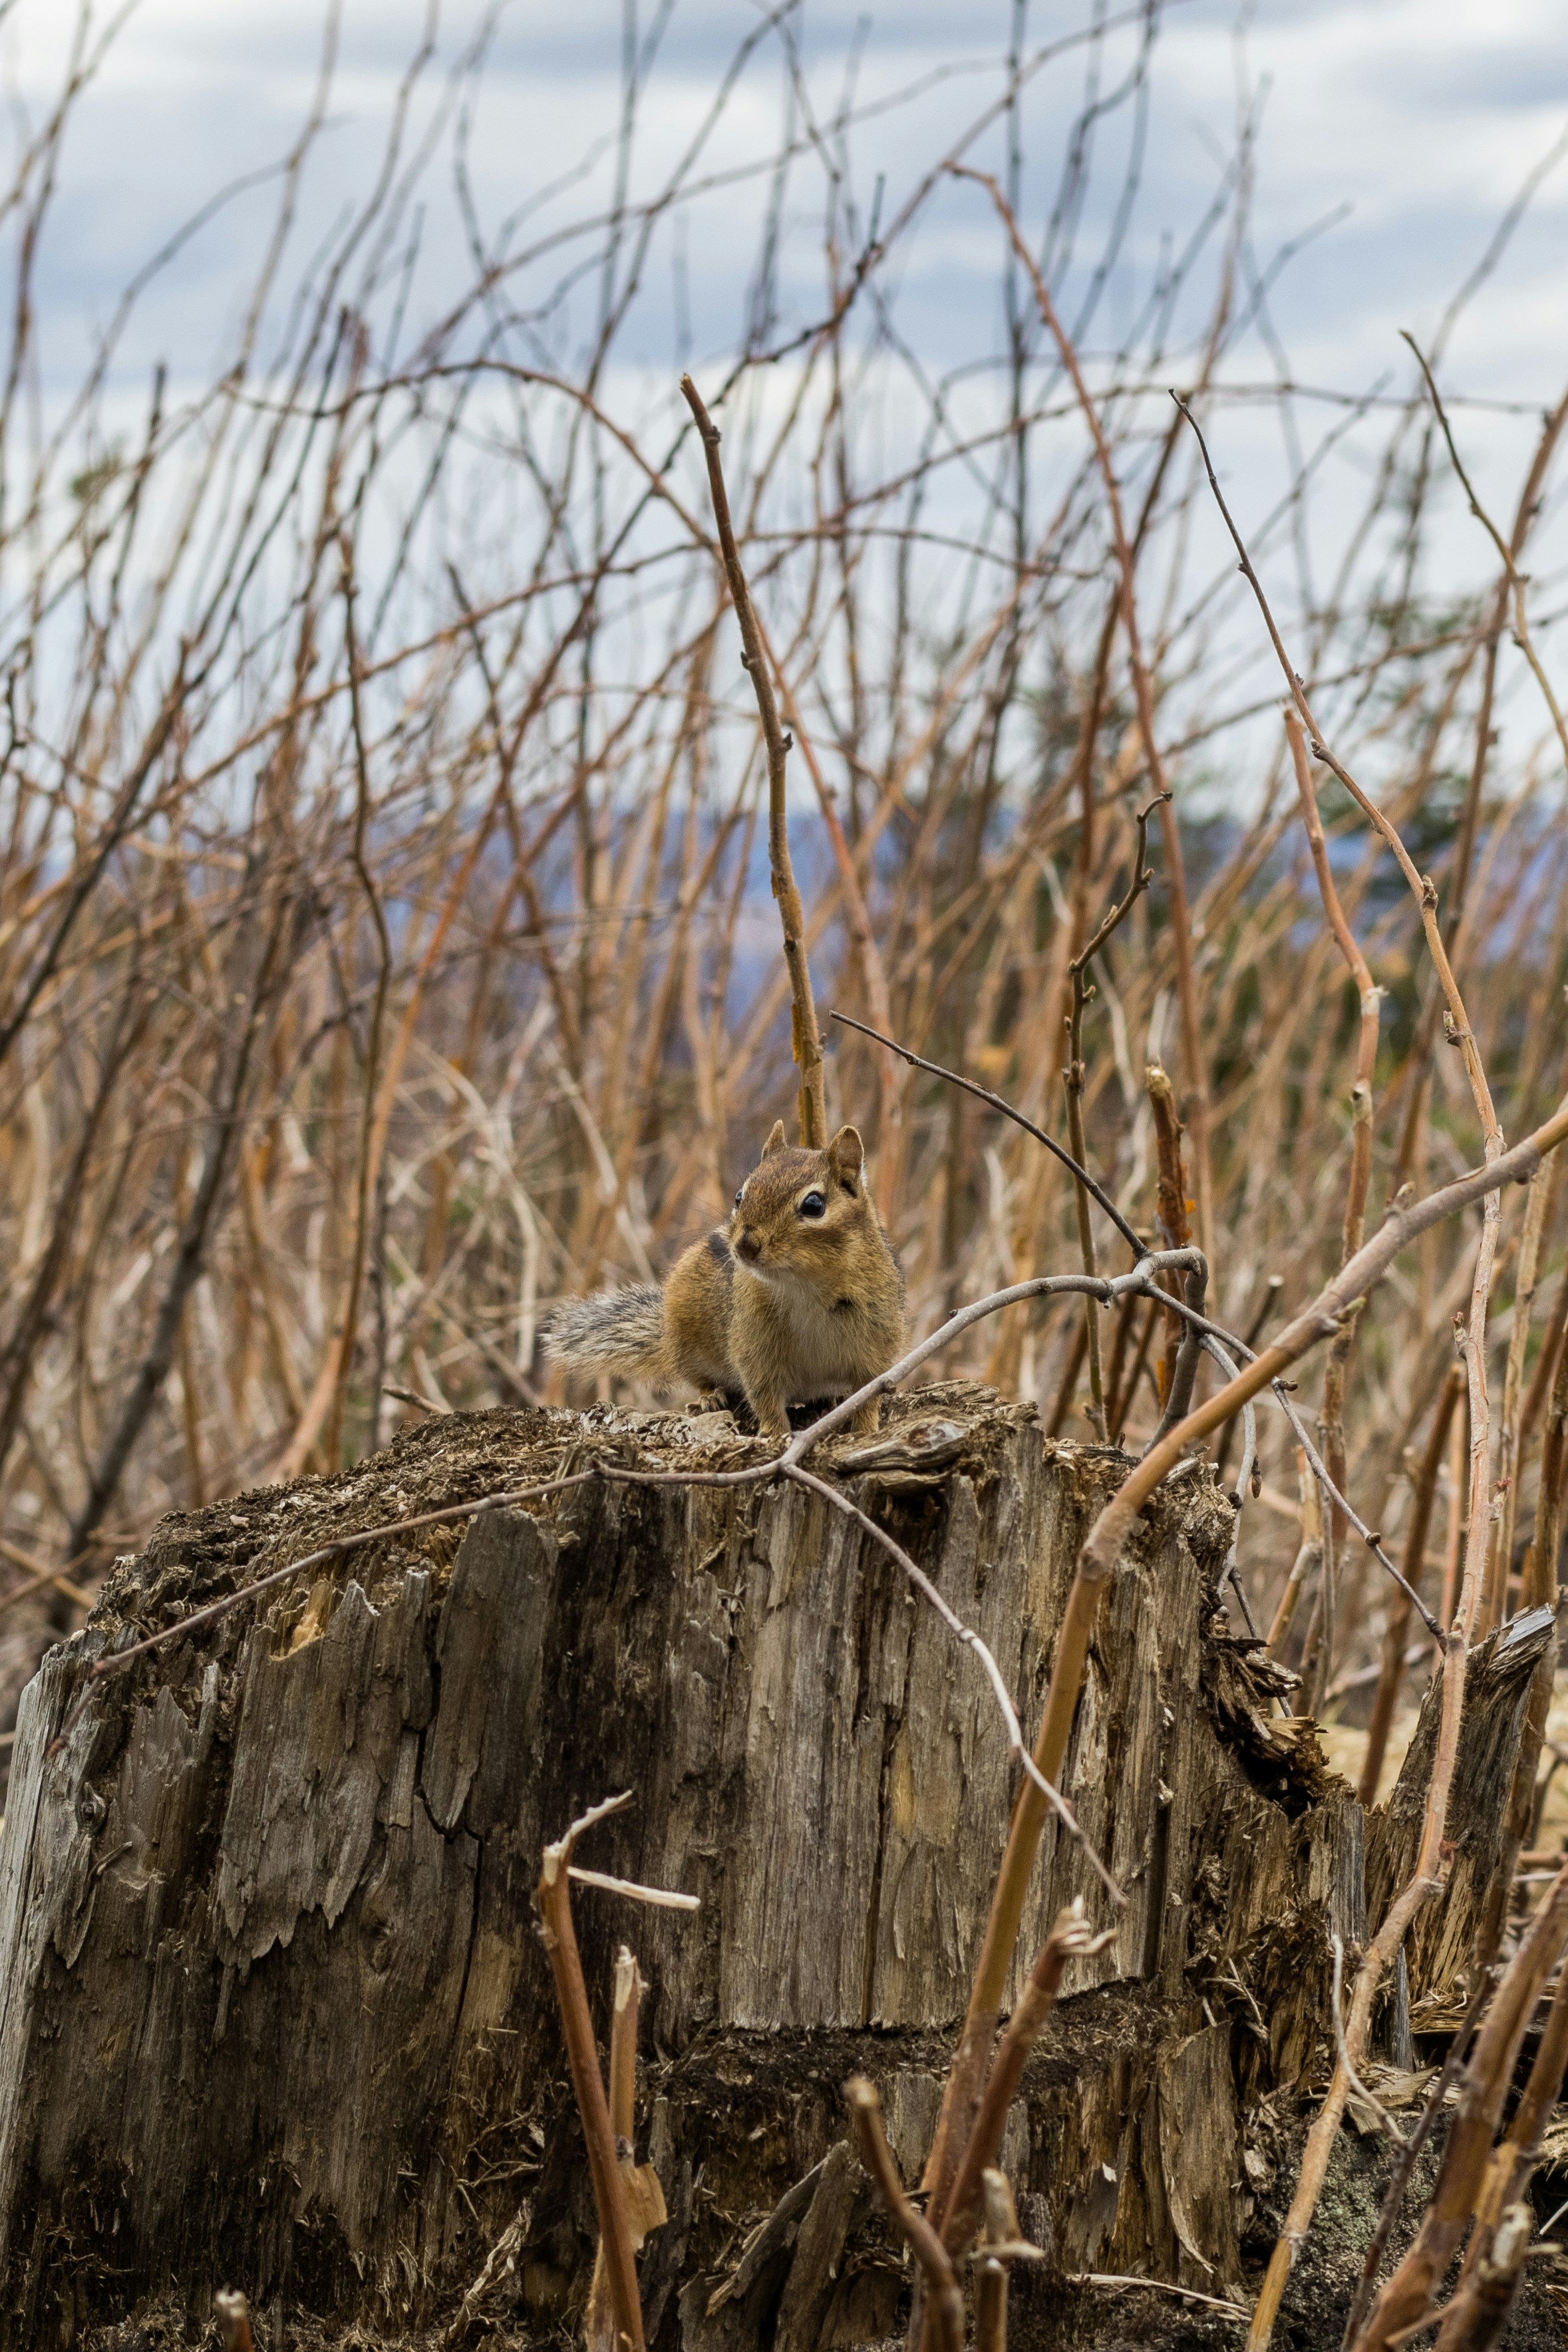 Small curious squirrel on top of a mountain